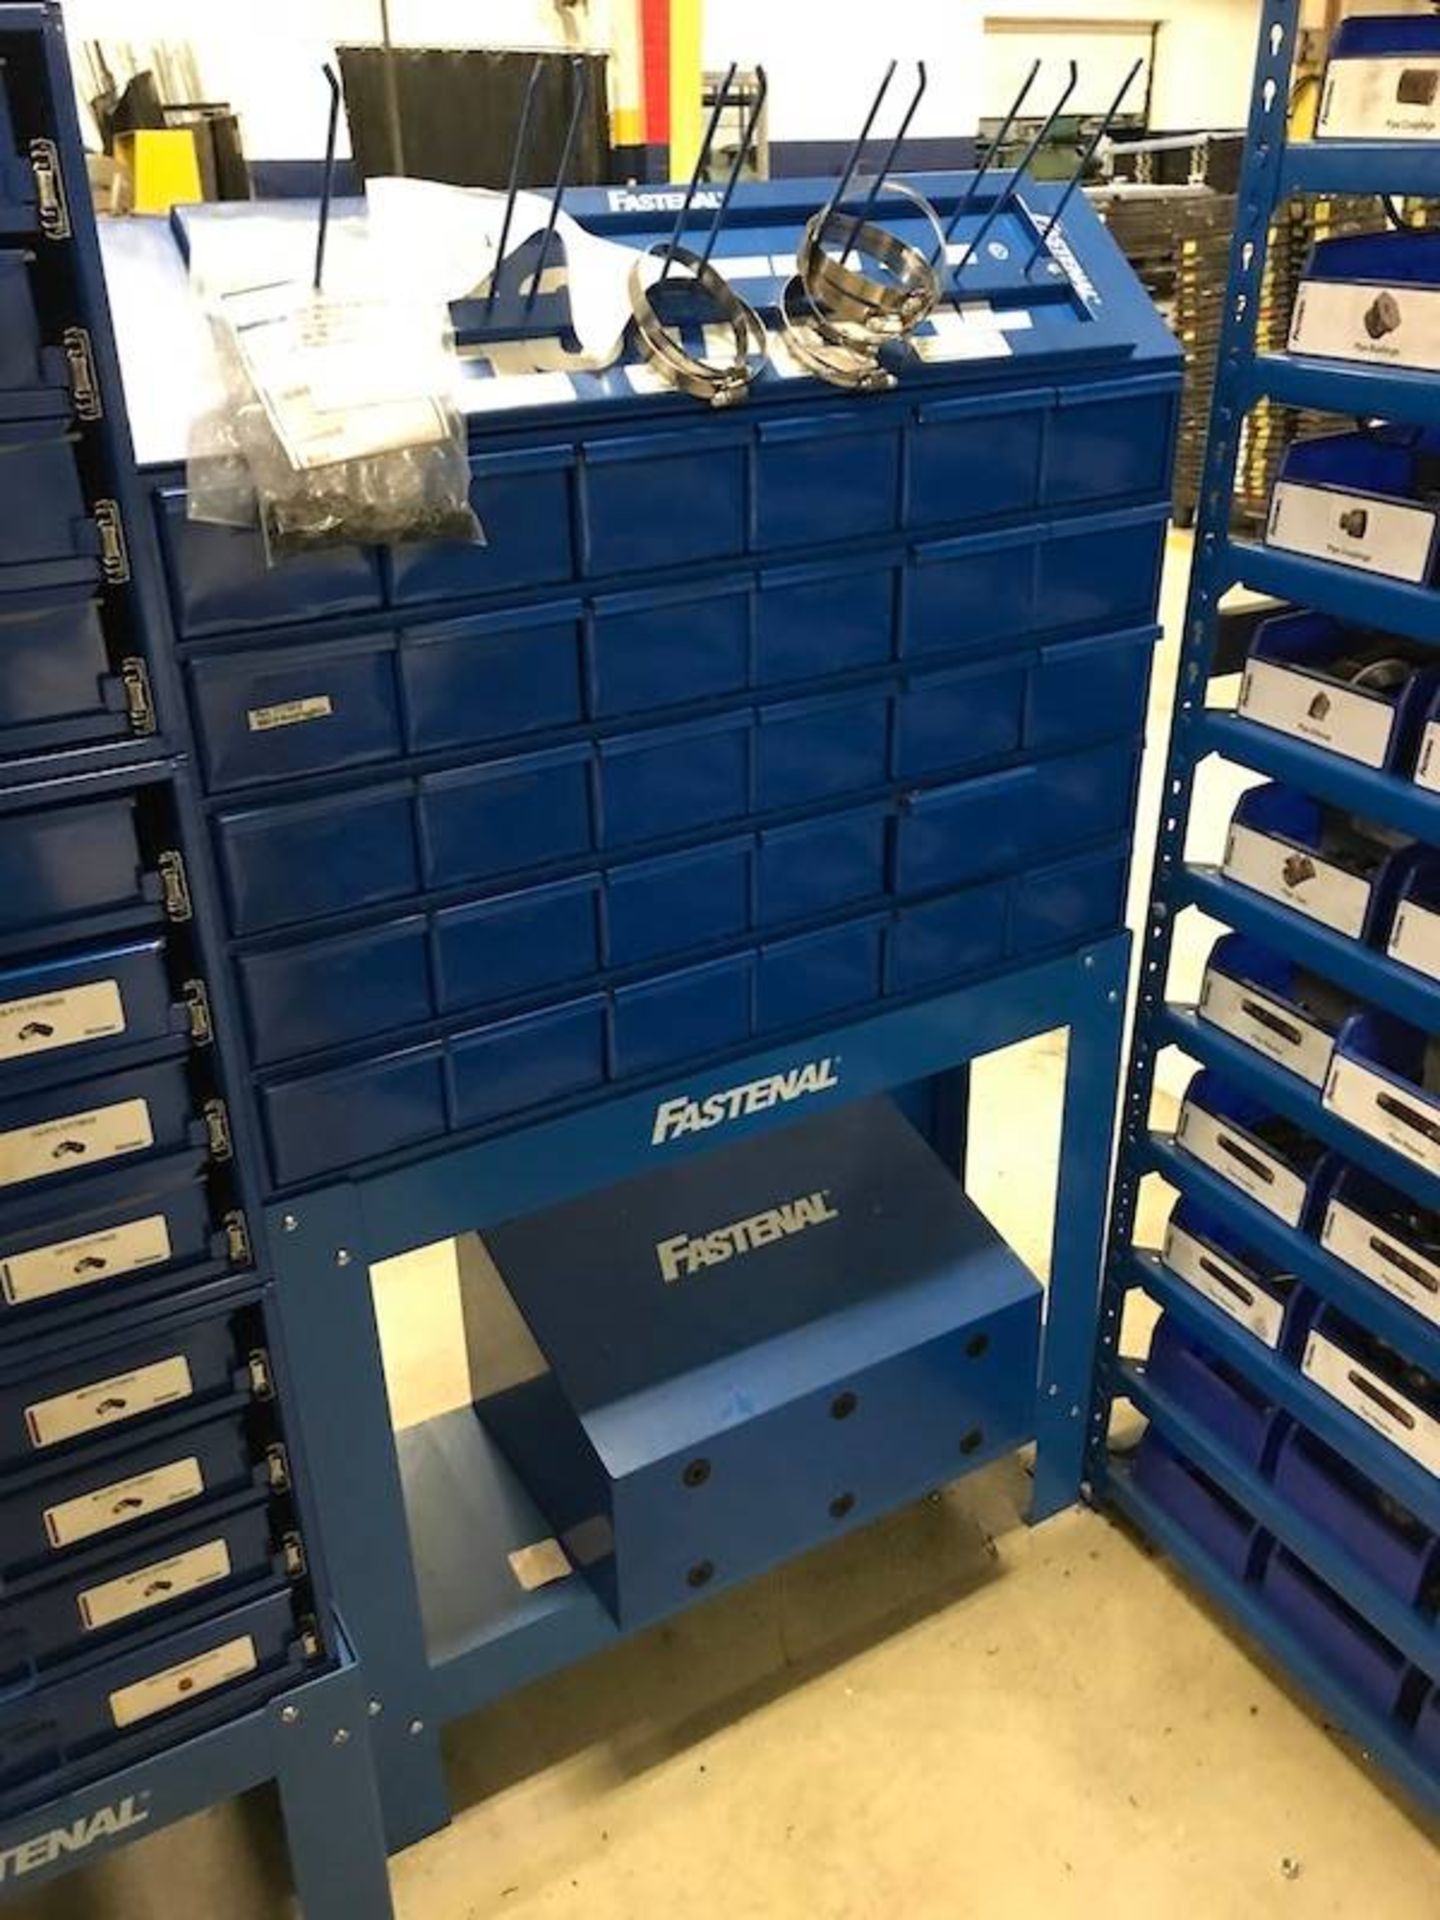 Contents of Fastenal Parts Bins - Image 2 of 70